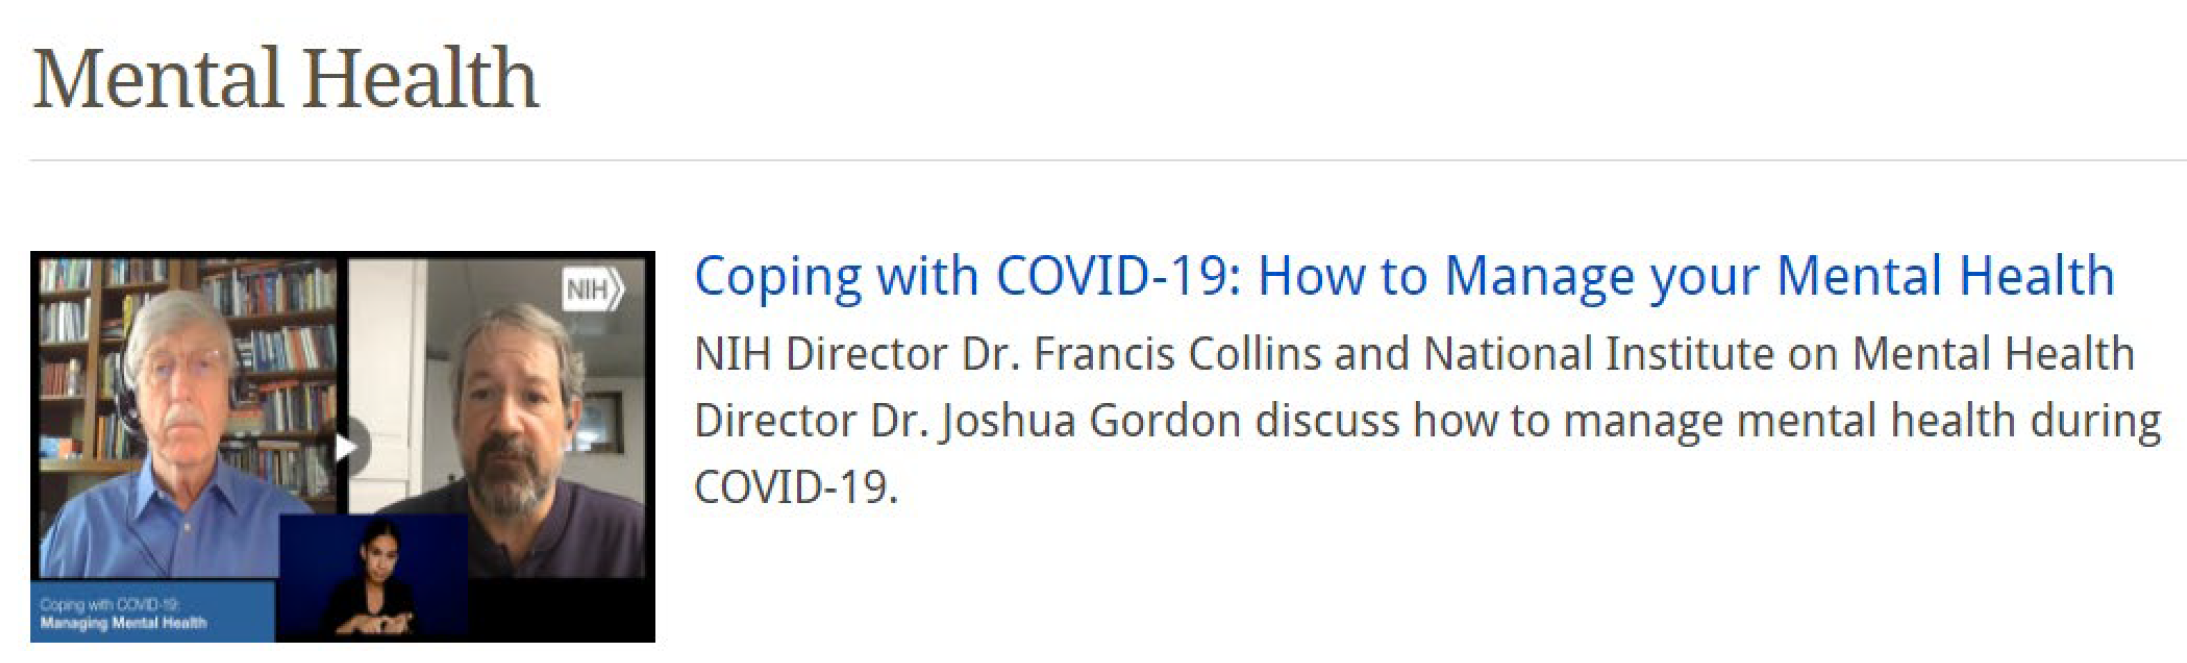 Screenshot of Drs. Francis Collins and Joshua Gordon in conversation by video, Coping with COVID-19: How to Manage Your Mental Health.